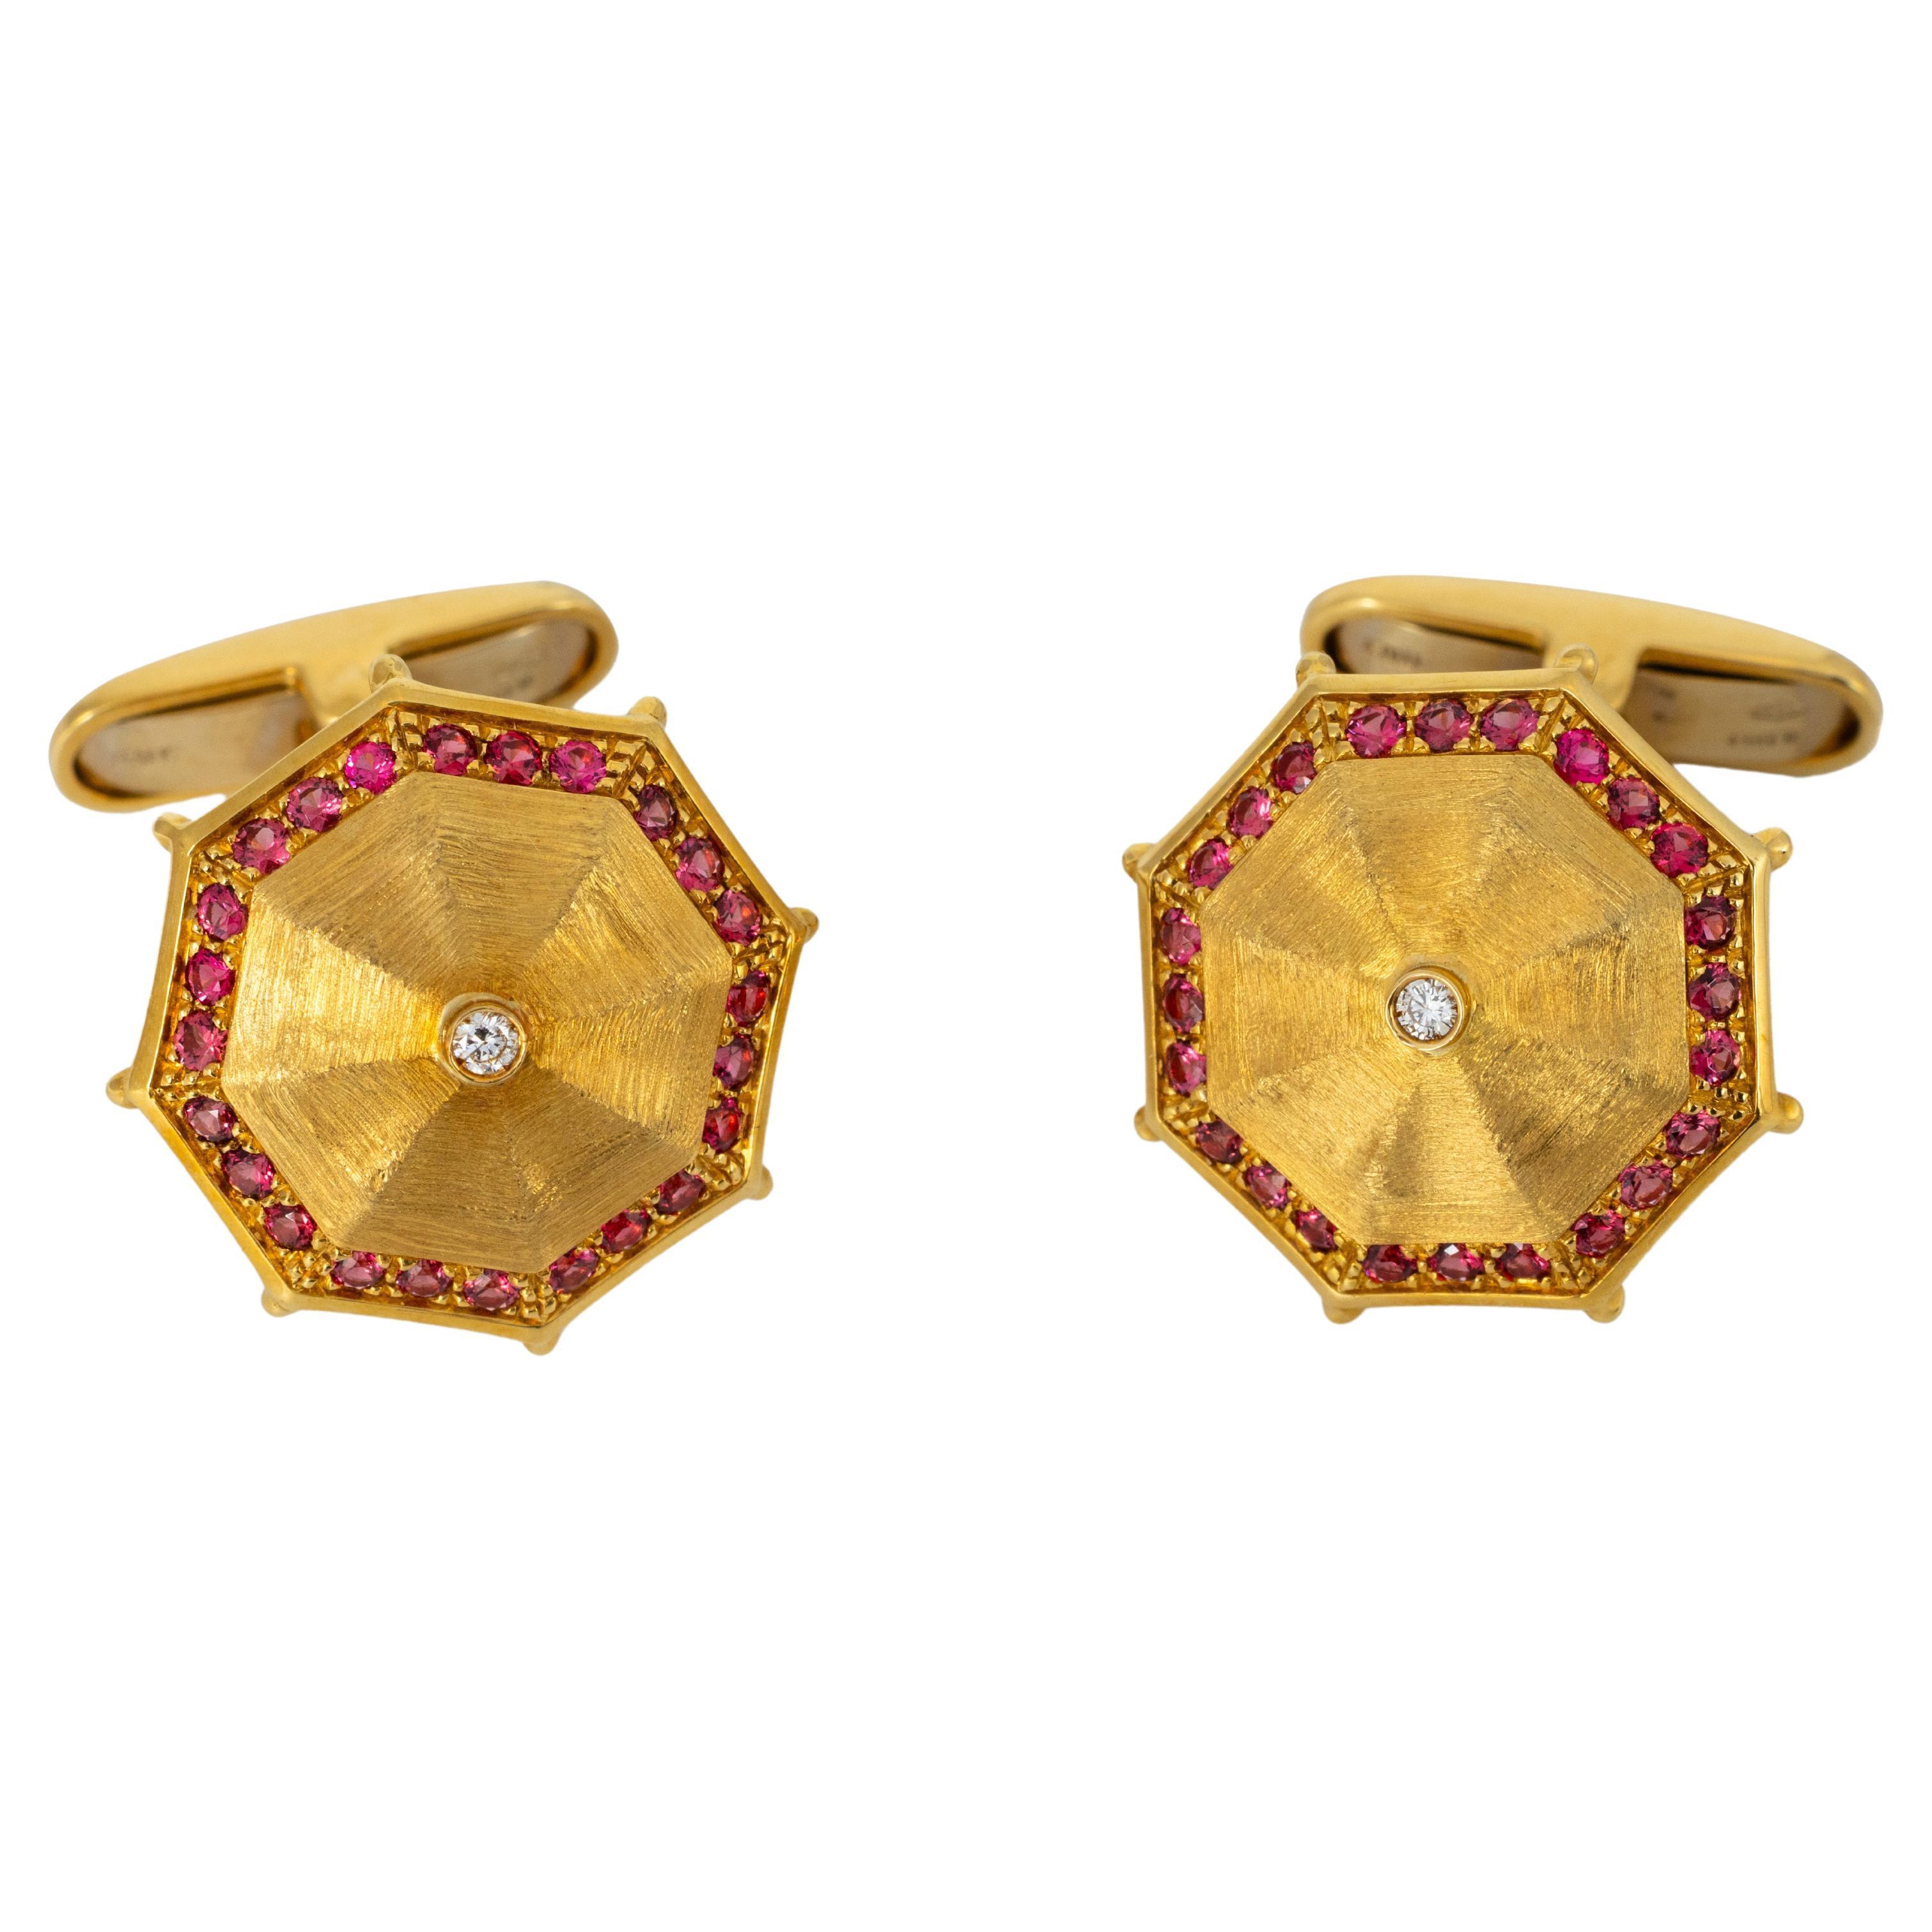 "Costis" Umbrella Collection Cufflinks YG with 0.76 carats Red Spinel on the rim For Sale